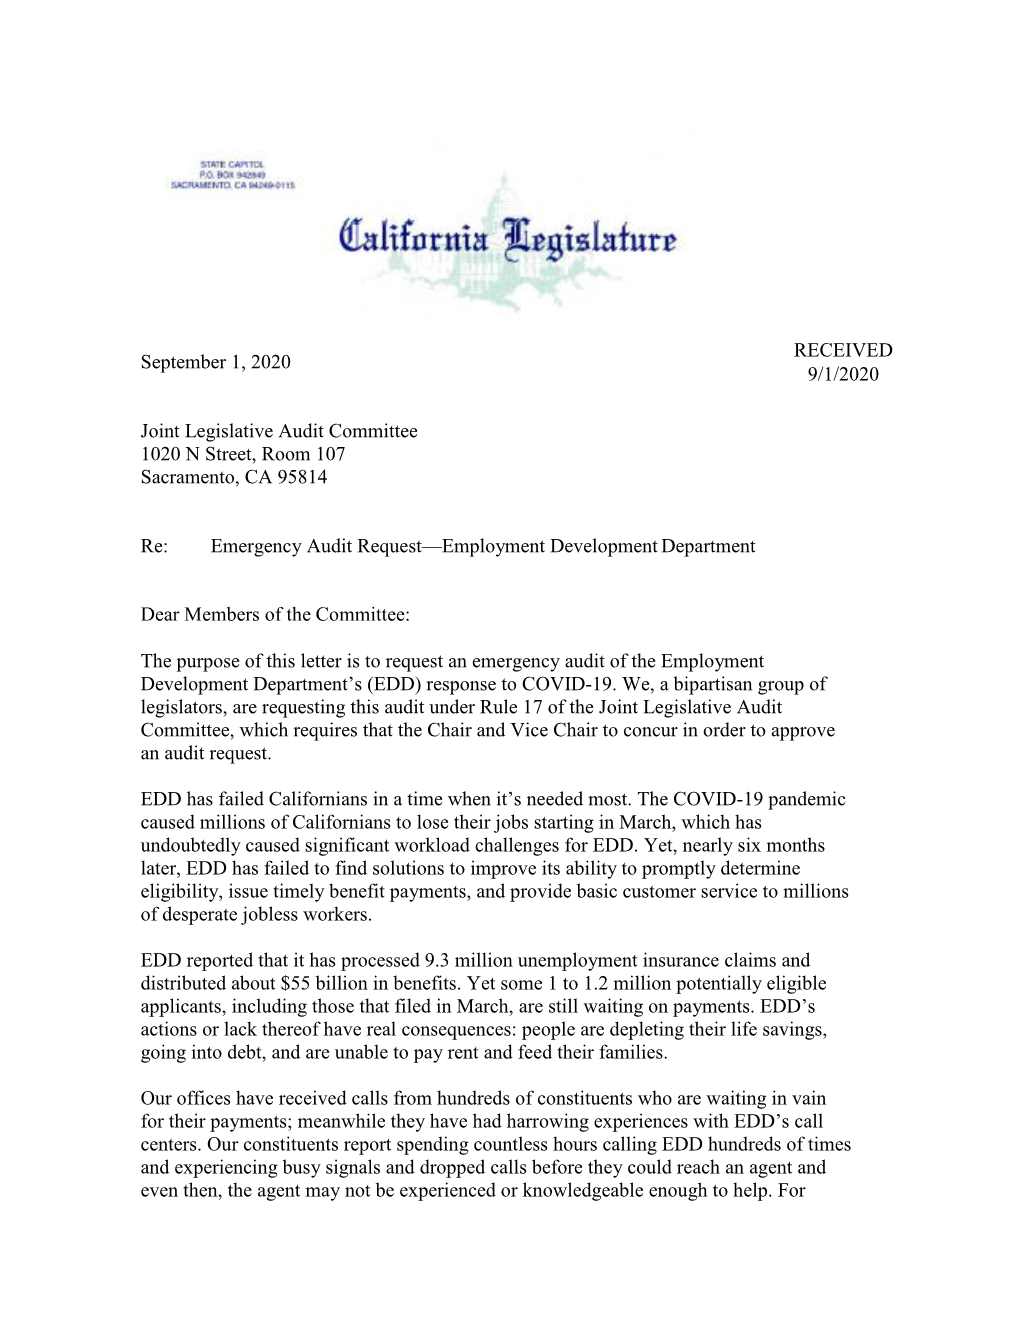 Letter to Legislative Audit Committee Requesting an Audit Of